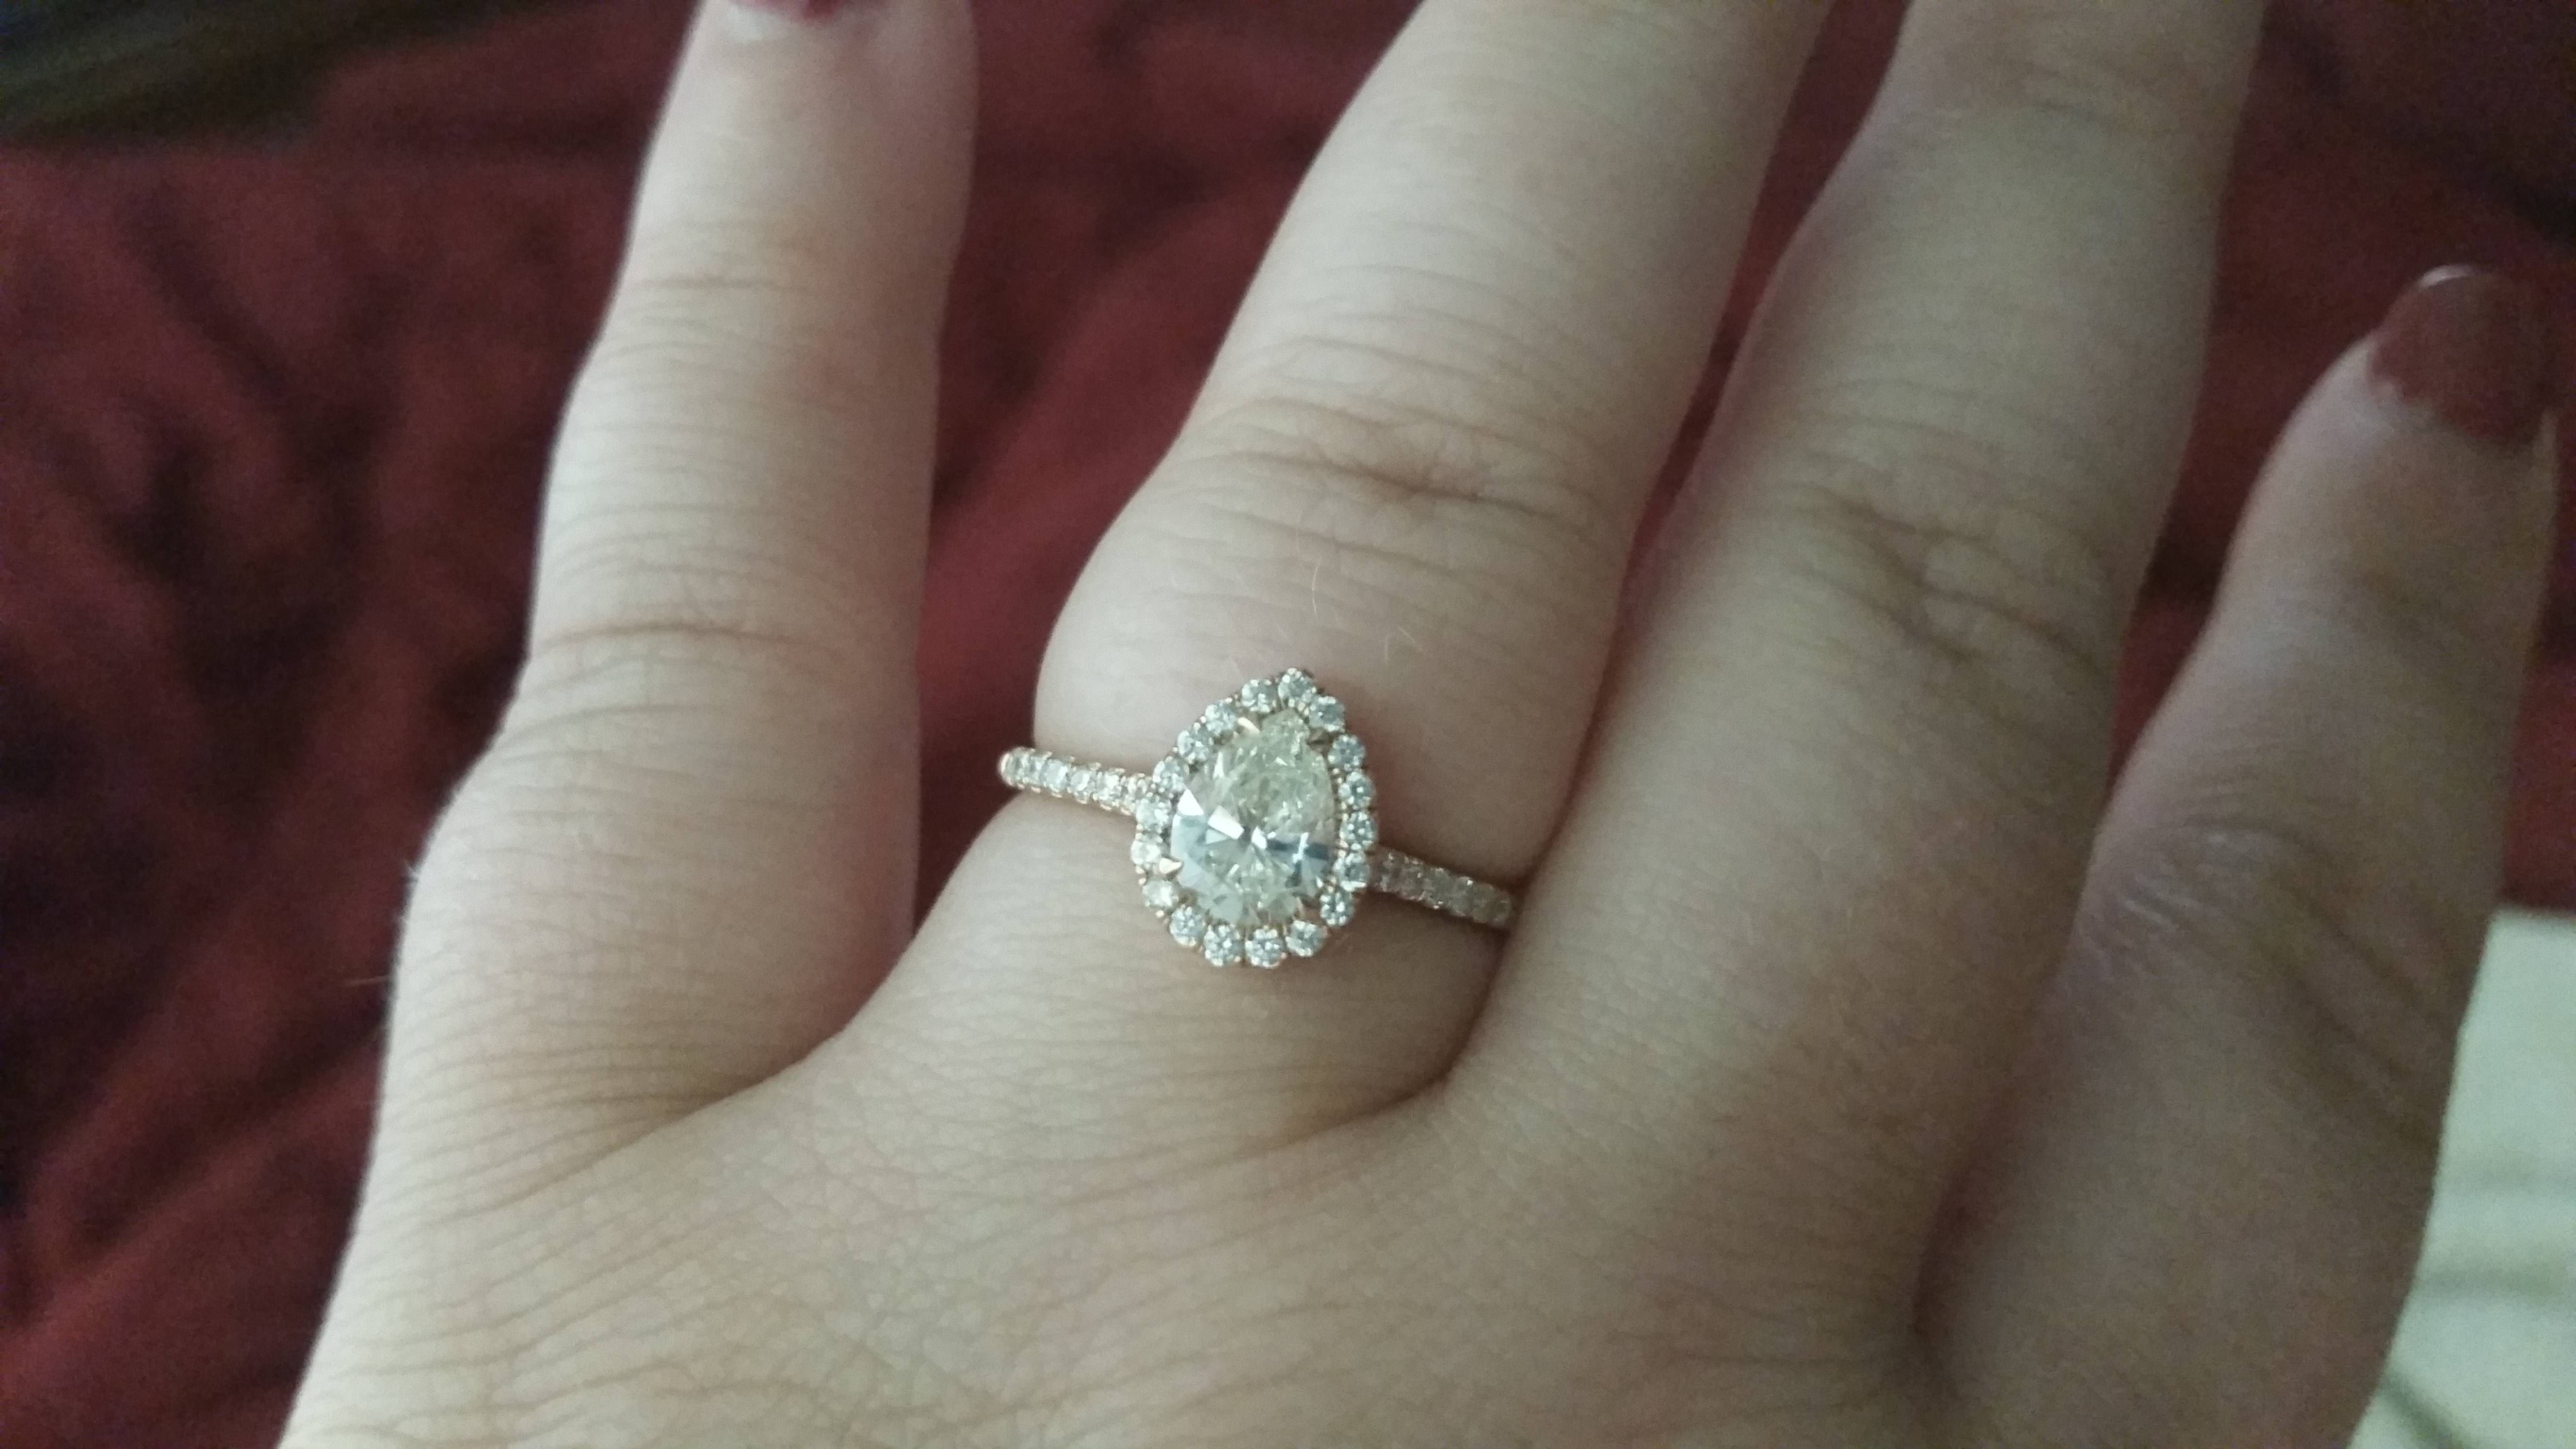 What Wedding Band For With A Pear Shaped Ring? – Weddingbee Inside Pear Shaped Engagement Rings And Wedding Bands (View 6 of 15)